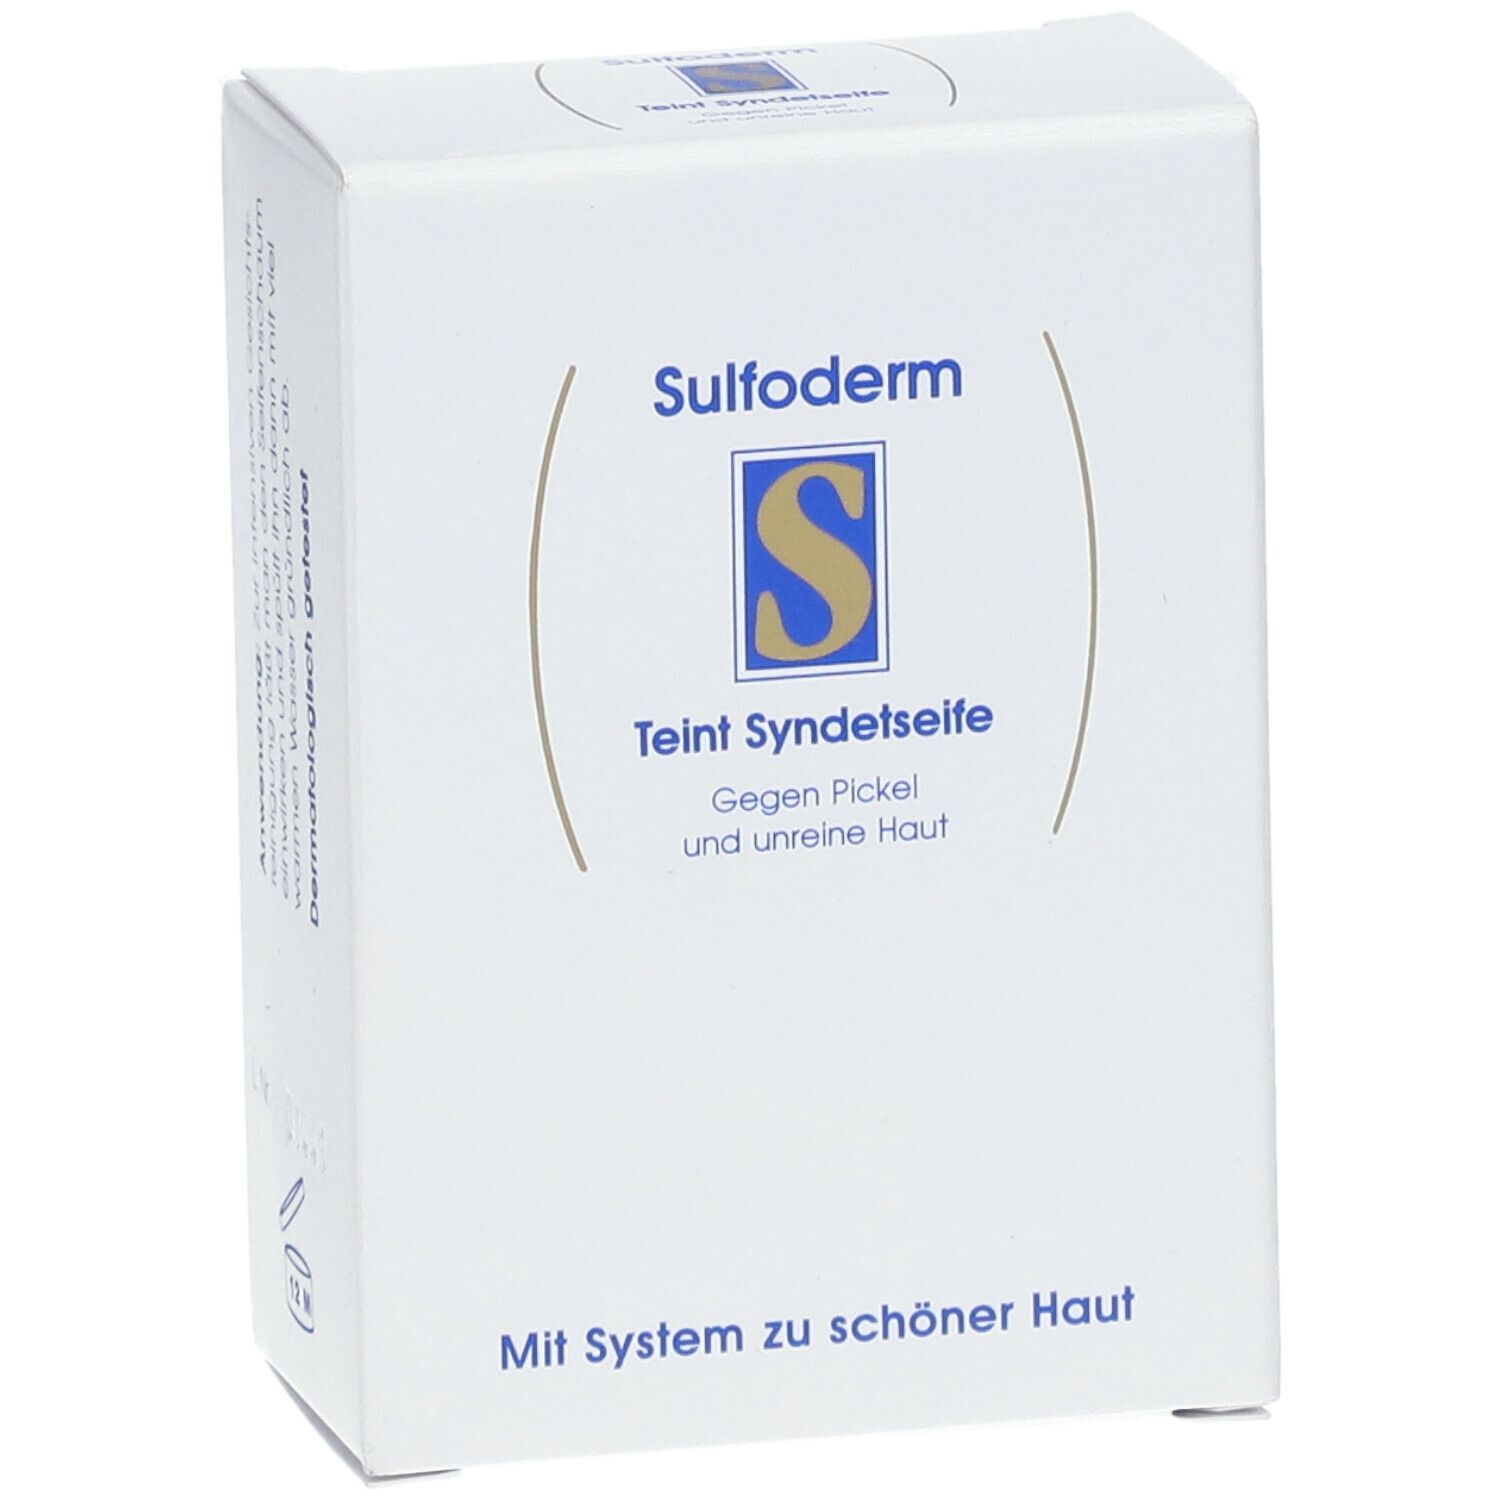 Sulfoderm® S Teint Syndetseife